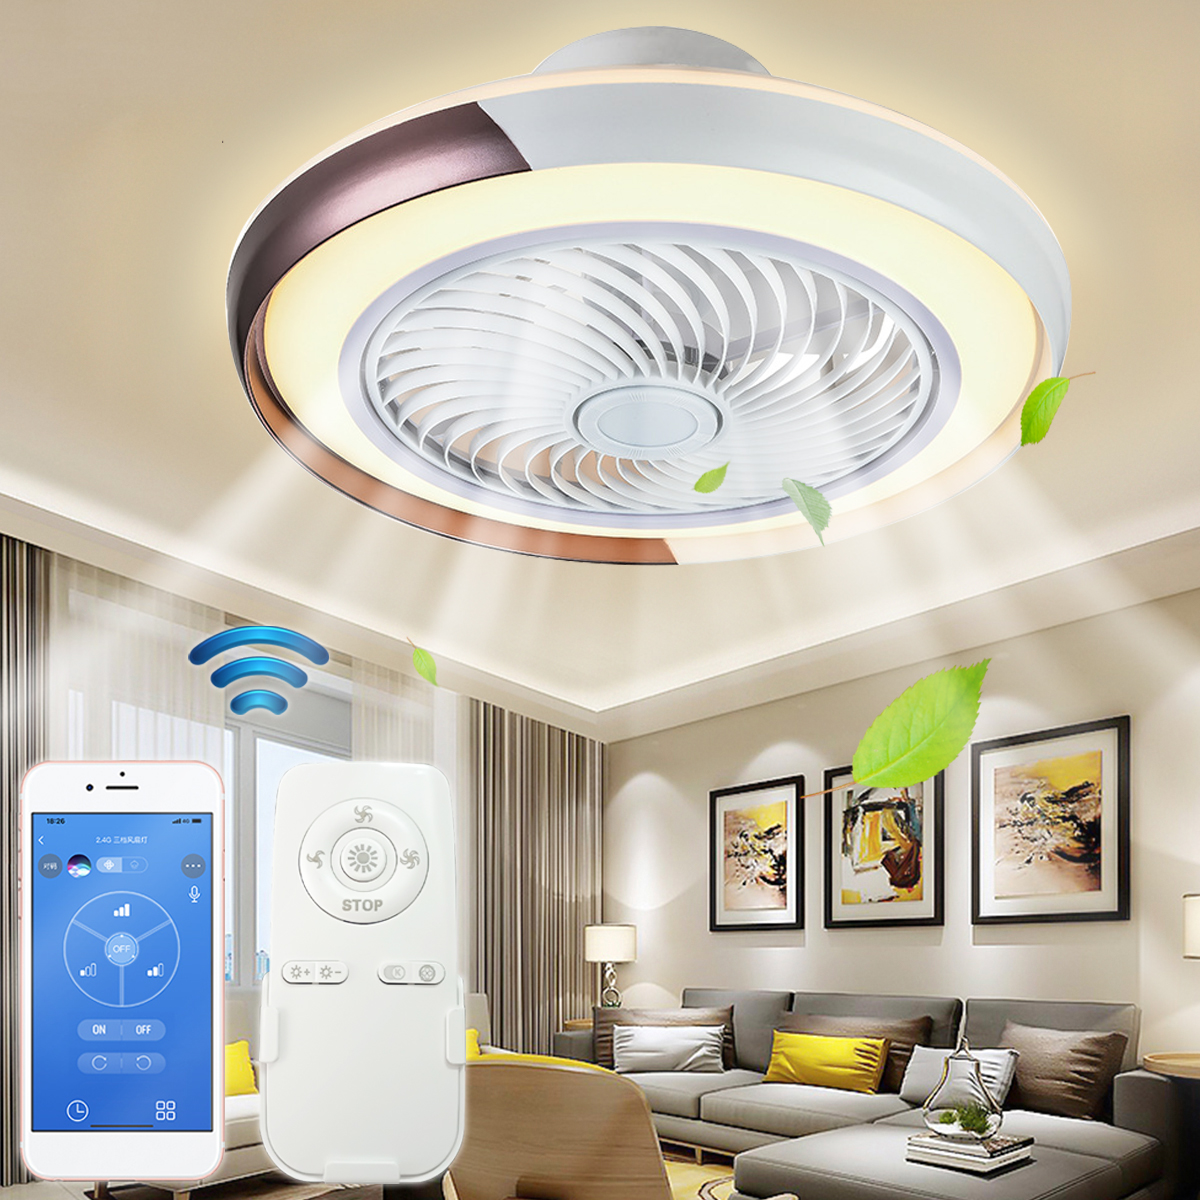 LED Room Ceiling Light Bedroom 2.4G Remote Control Dimming Living Room Lamps 